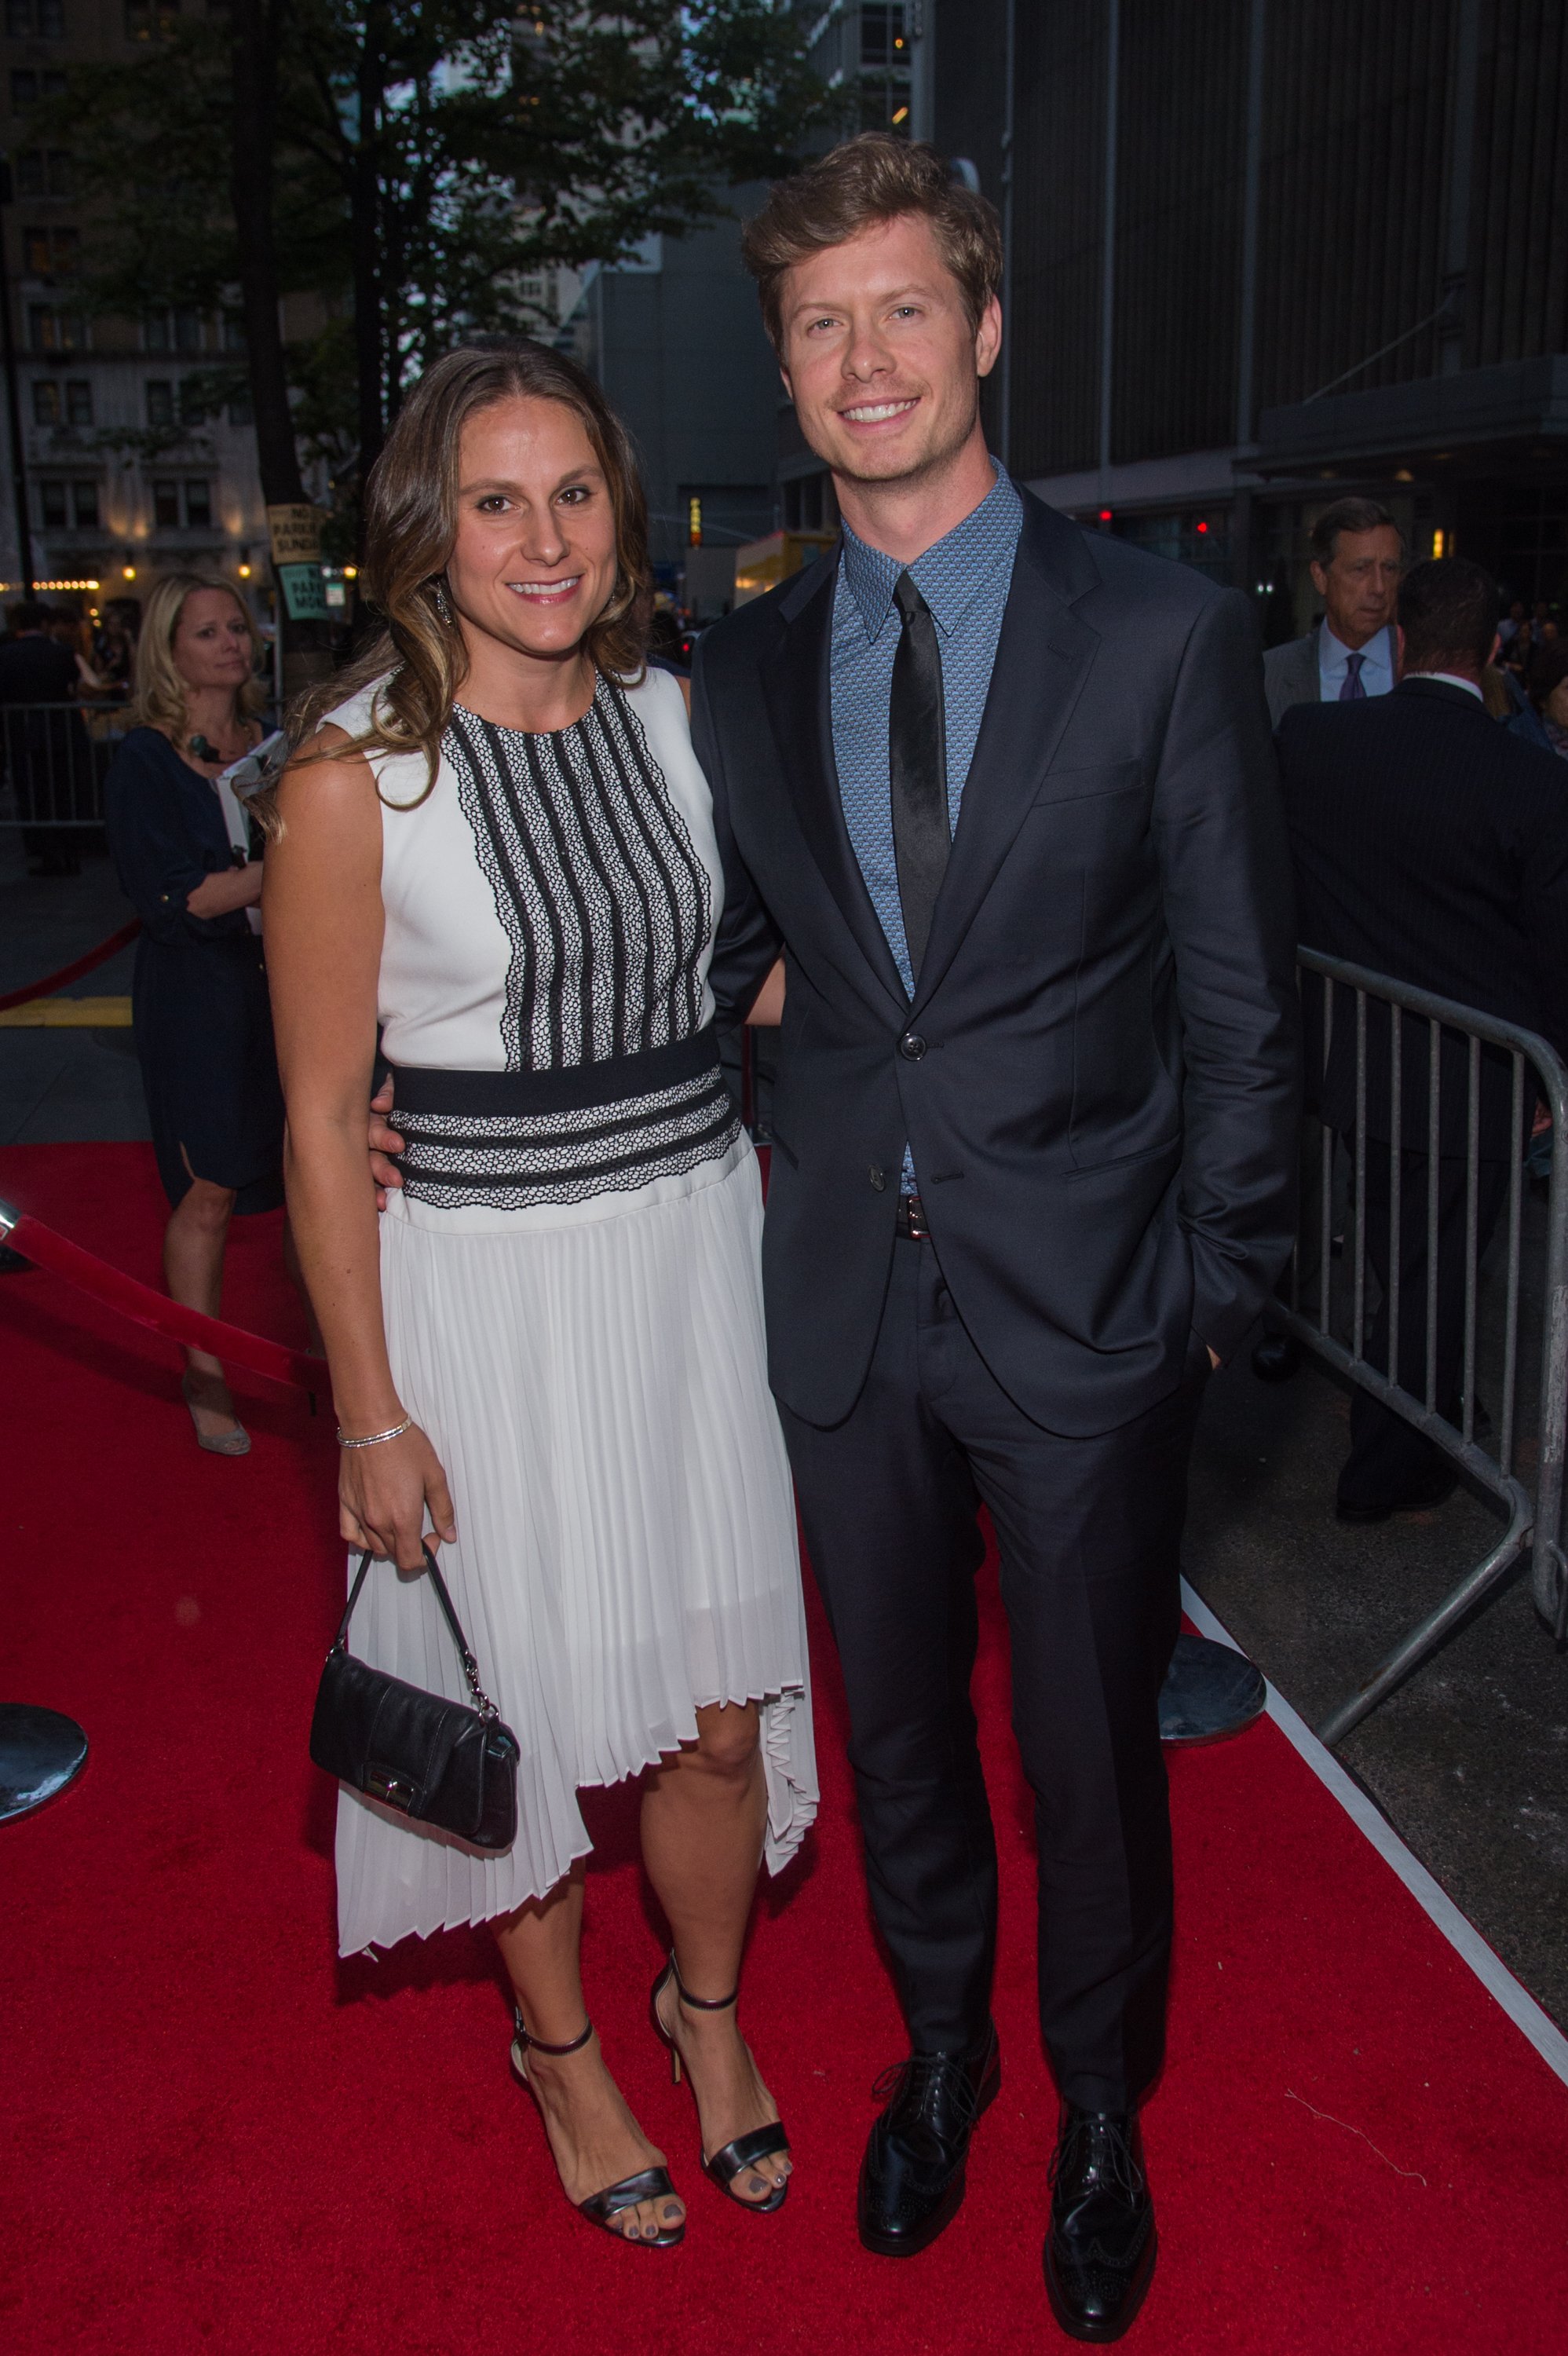 Emma Nesper and Anders Holm attend "The Intern"  Premiere at the Ziegfeld Theater, New York City, on September 21, 2015. | Source: Getty Images